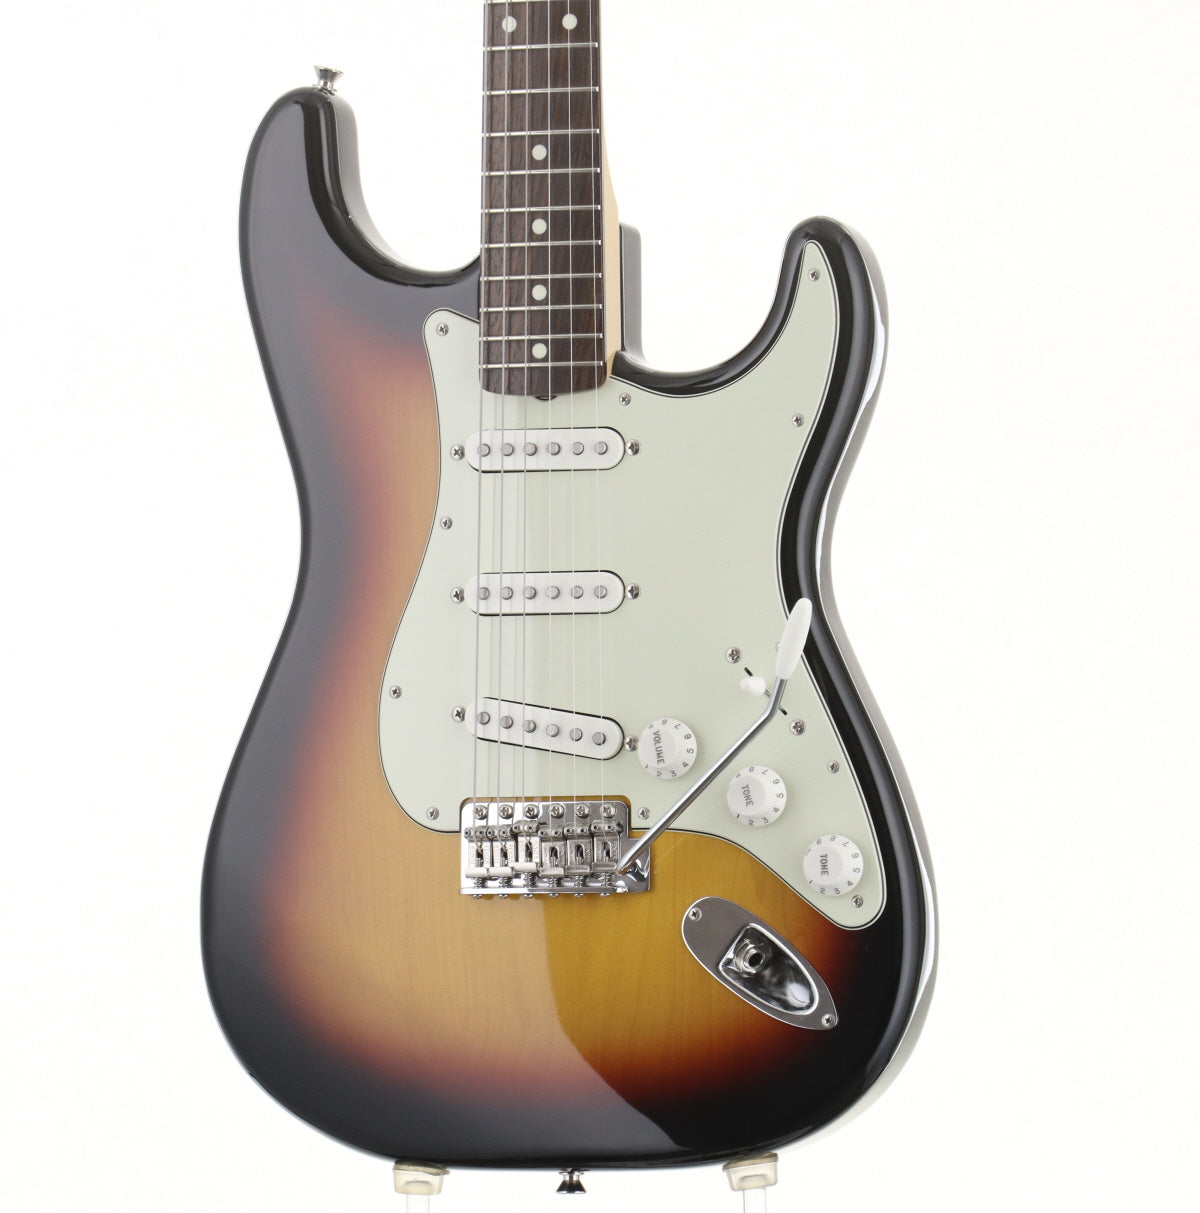 [SN JD22027934] USED FENDER MADE IN JAPAN / Traditional II 60s Stratocaster 3-Tone Sunburst [05]